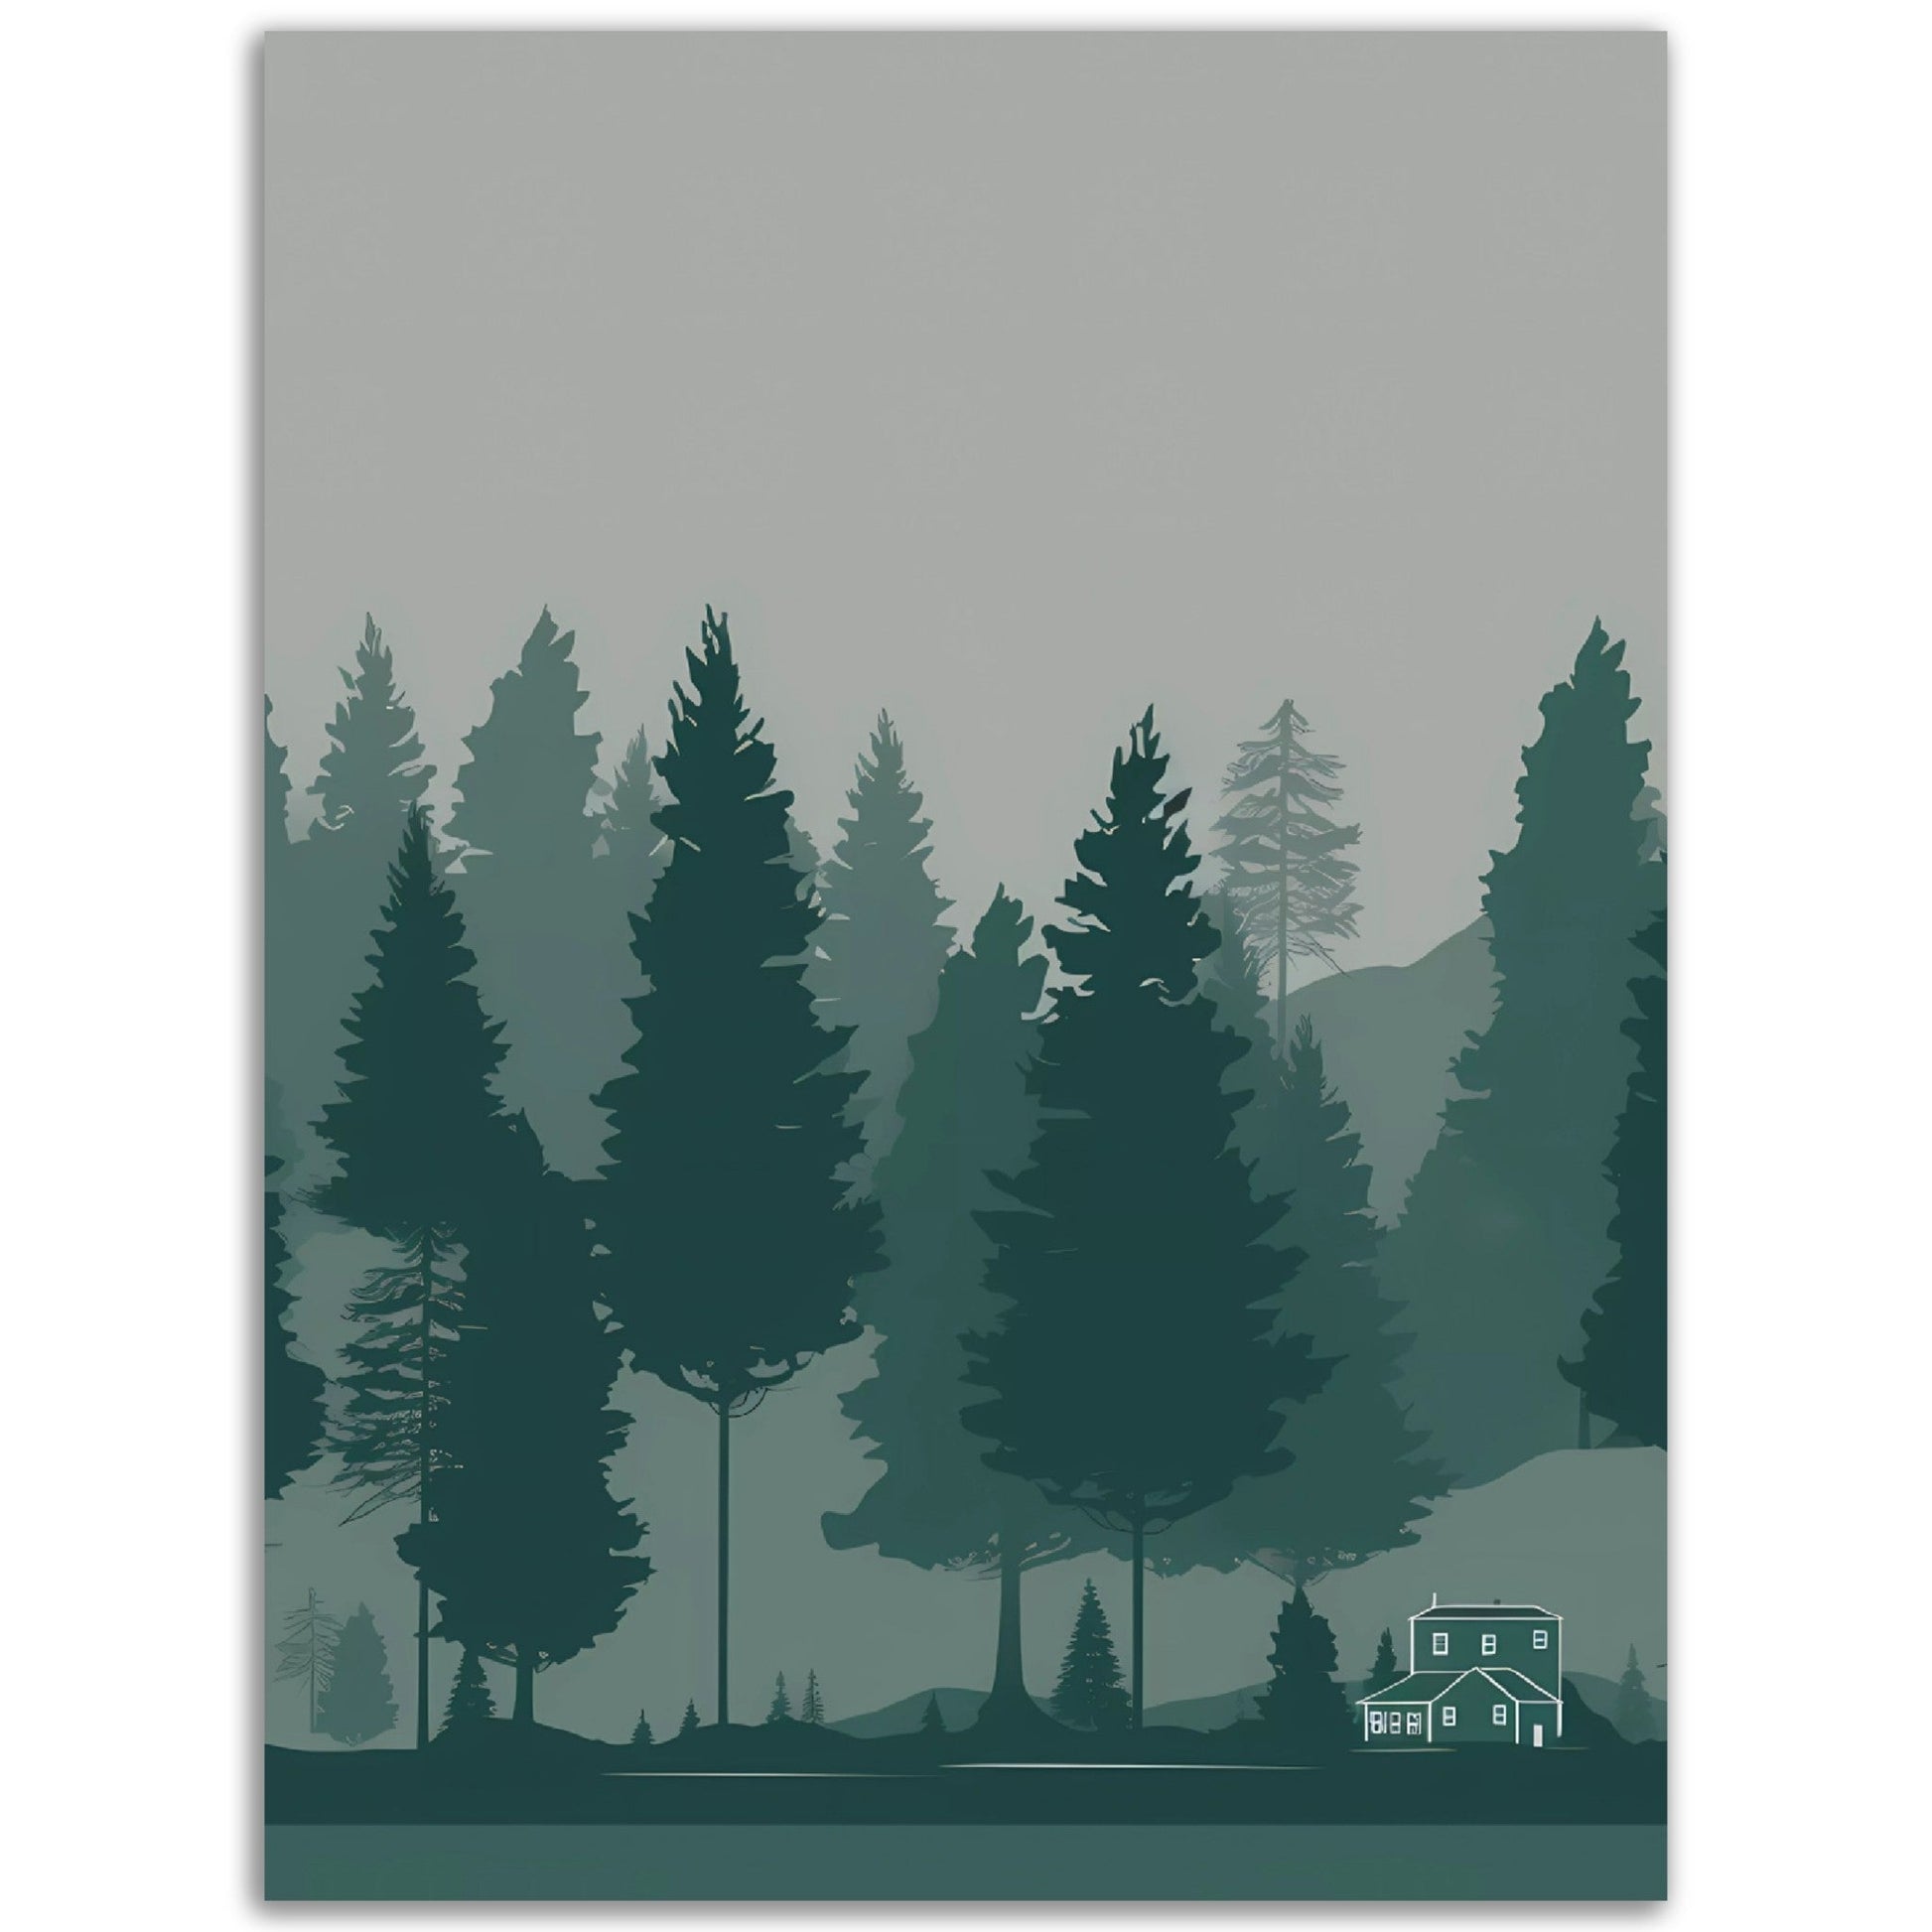 An Isolated Home poster featuring trees and a truck in the background. Perfect for adding a pop of color to your room's wall art collection.